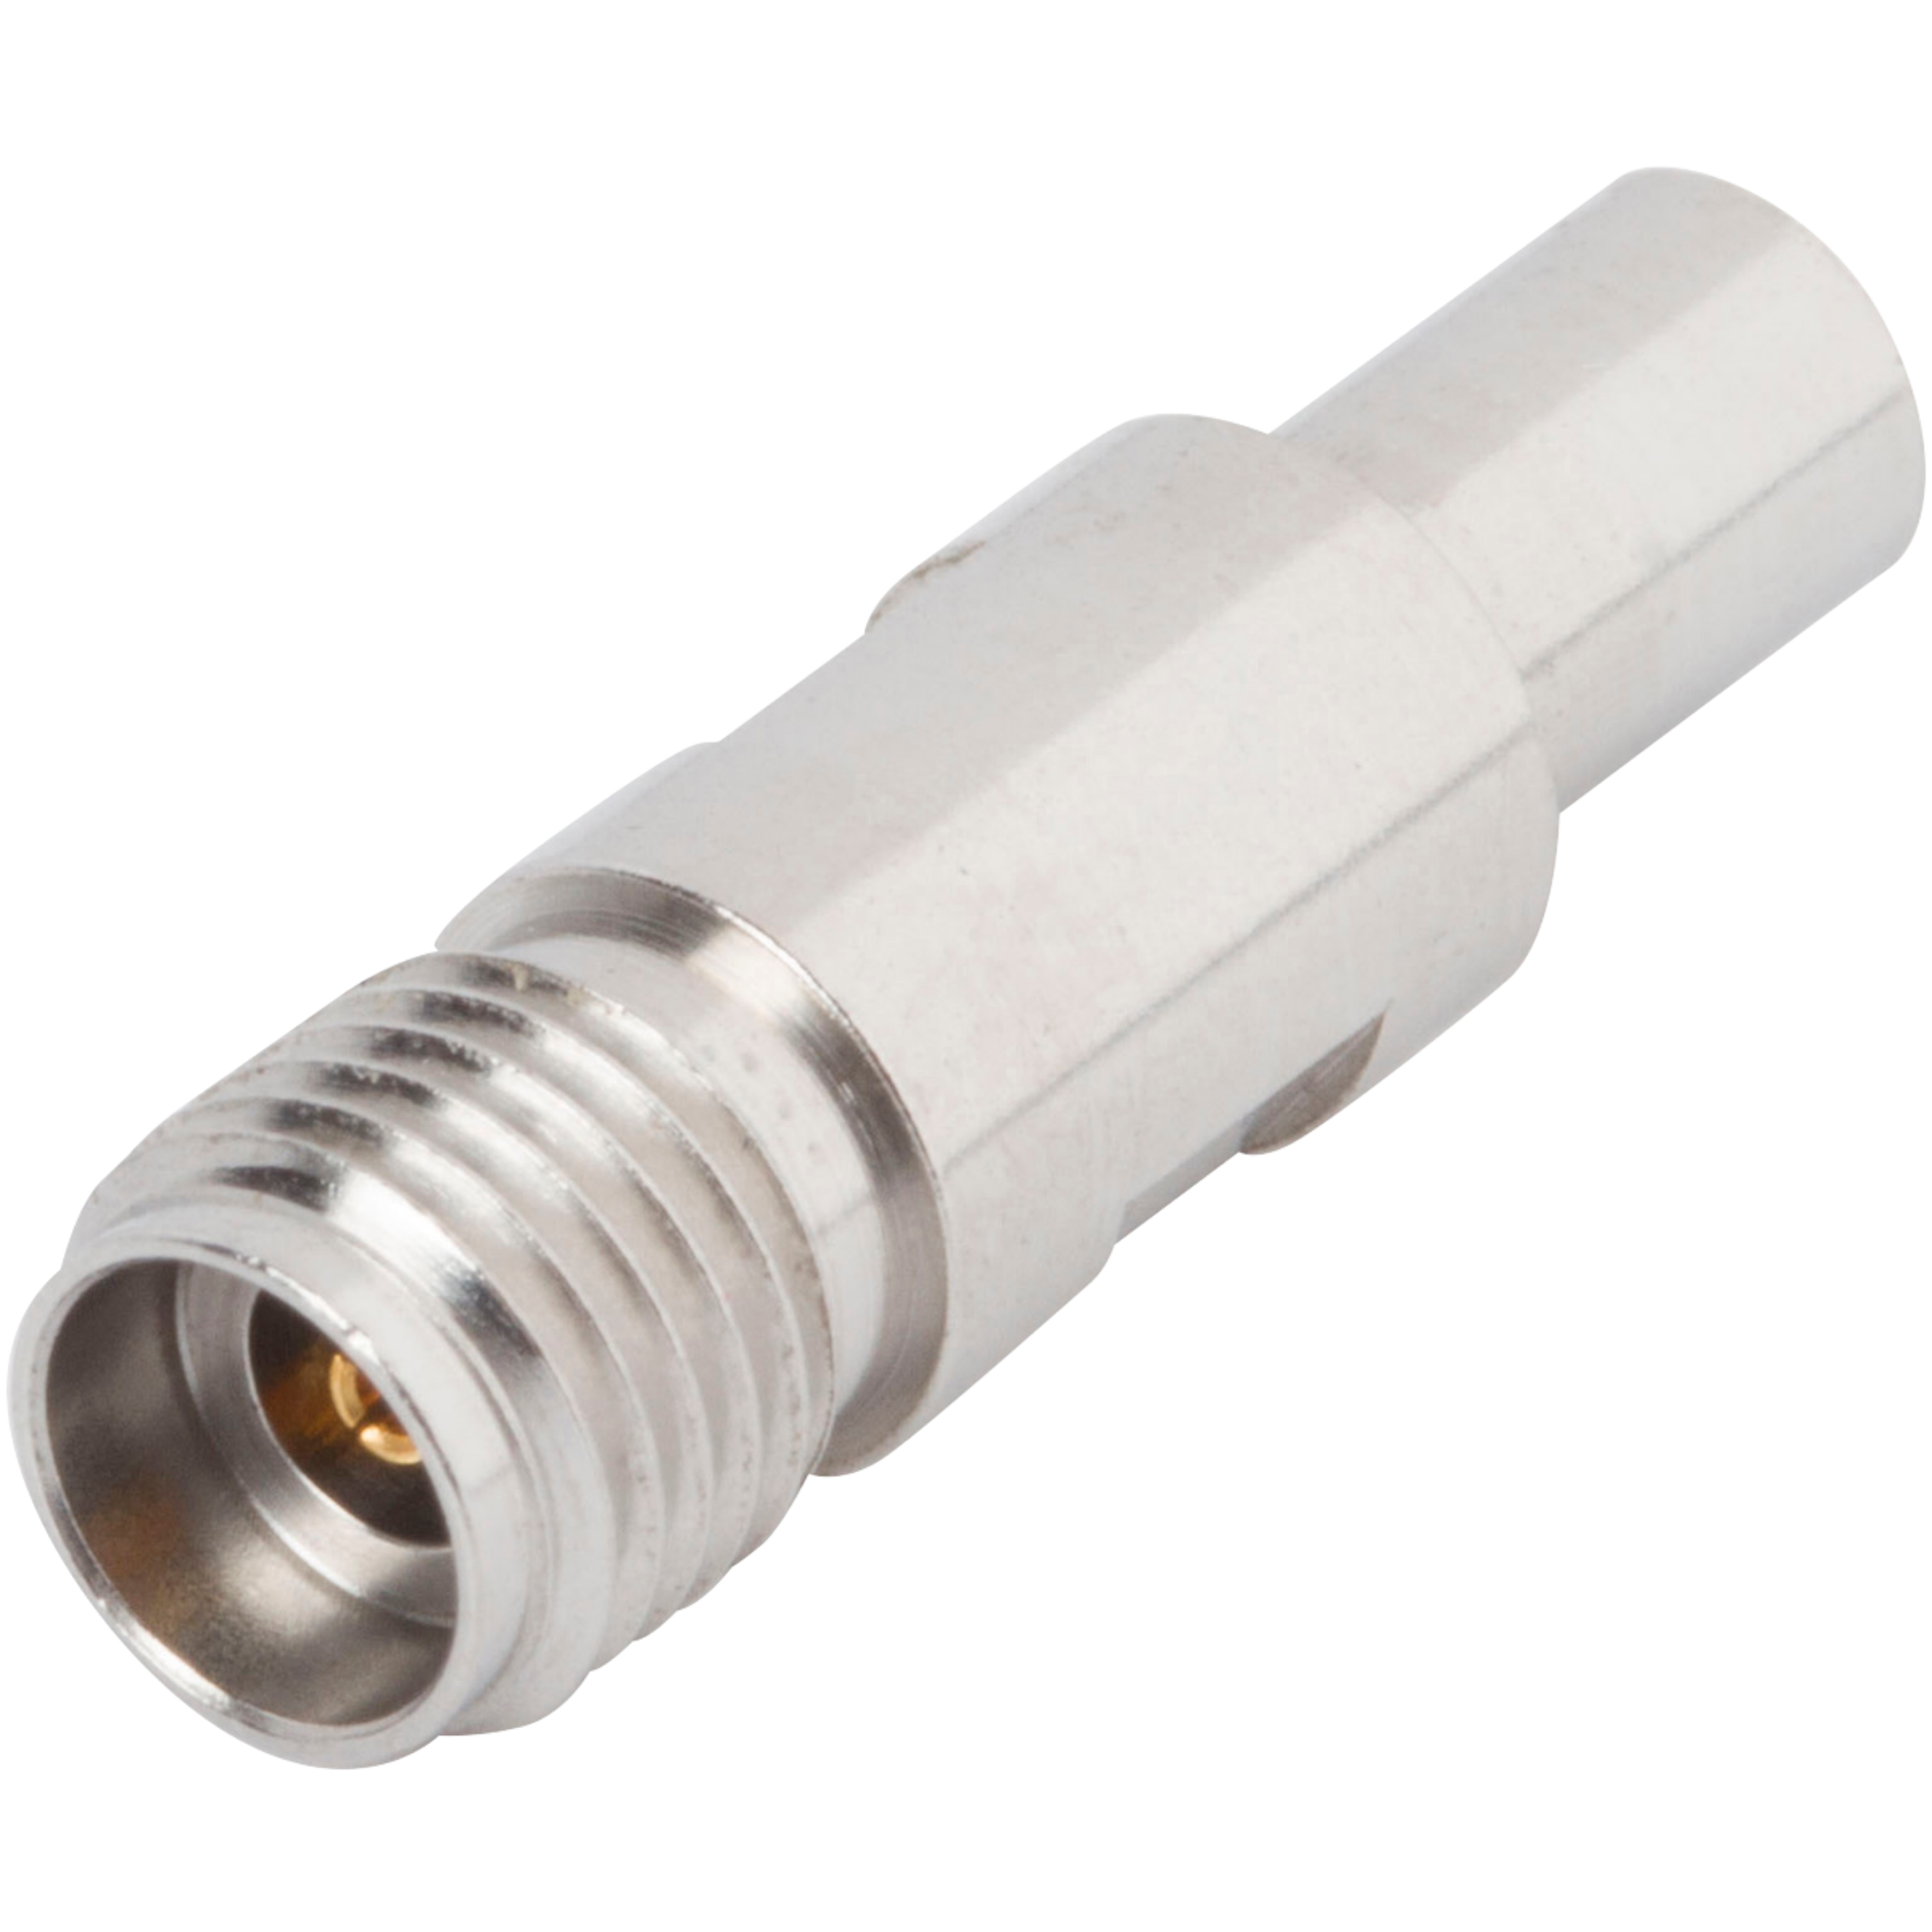 SMP Male to 2.92 Female Adapter, LD, SF1112-6025